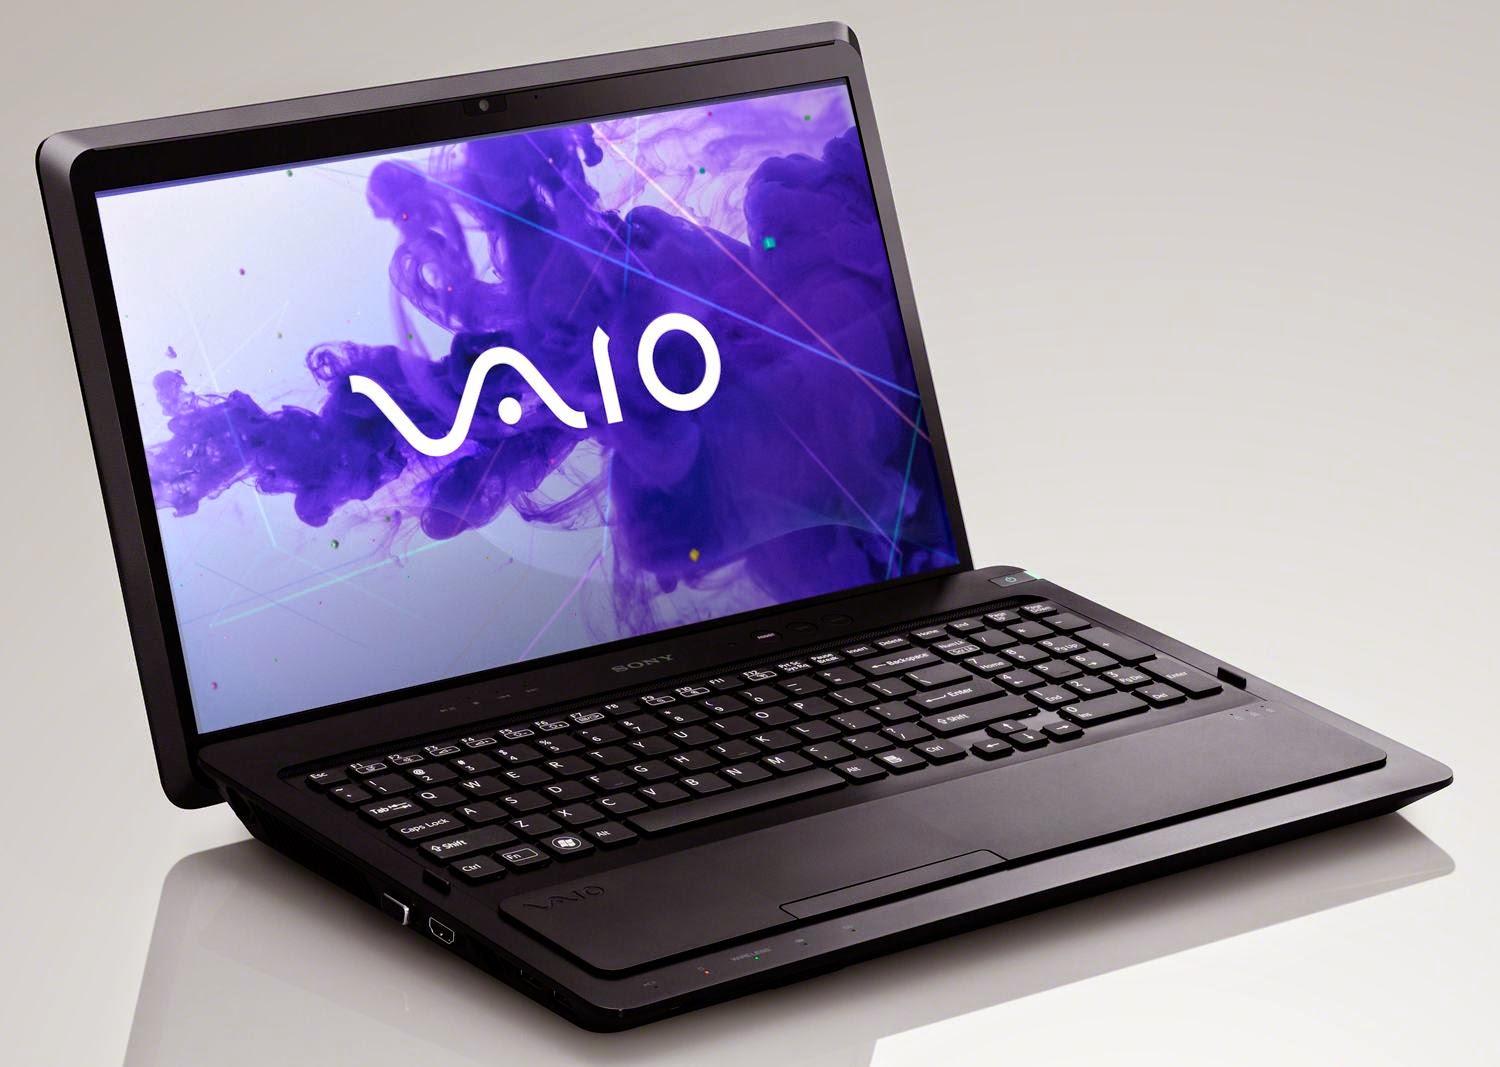 drivers for sony vaio